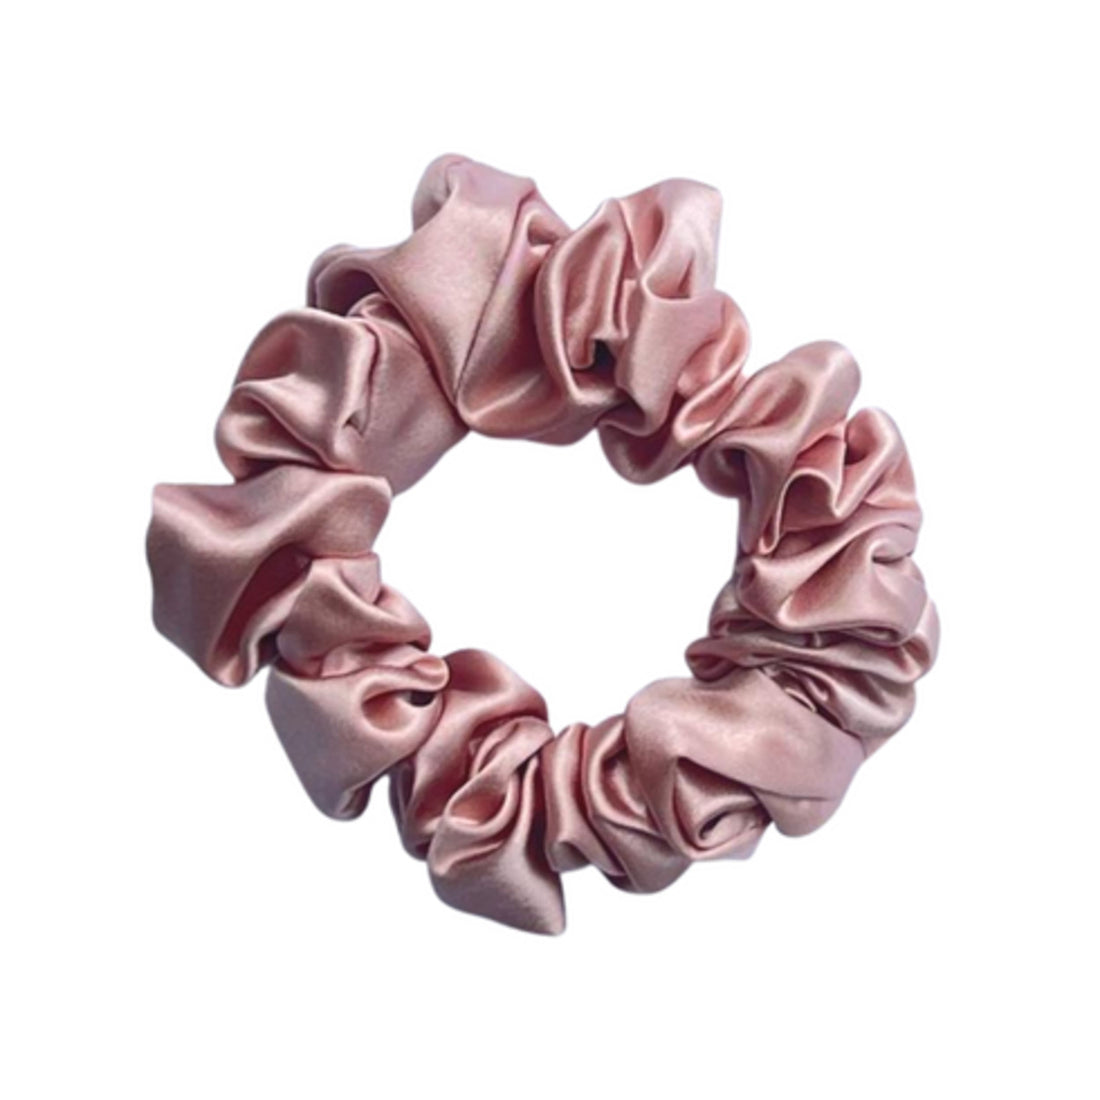 Save yourself from hair breakage and knots and allow our silky scrunchies to improve the quality of your hair's life! We use the highest quality (6A) 100% Mulberry silk with a thickness of 22 momme to ensure your endless experience.